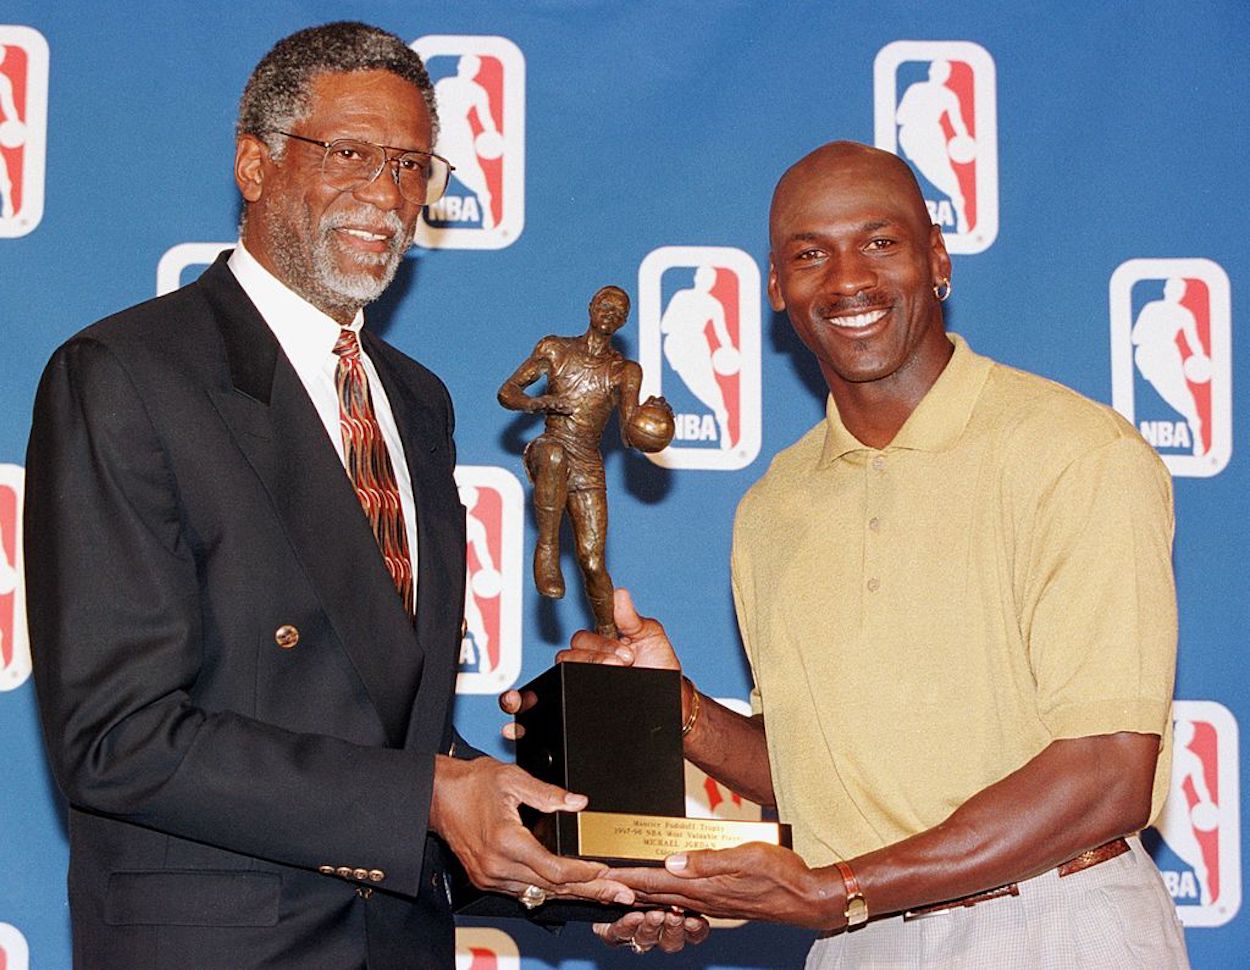 Michael Jordan Was Once on the Receiving End of Some Biting Trash Talk from Bill Russell